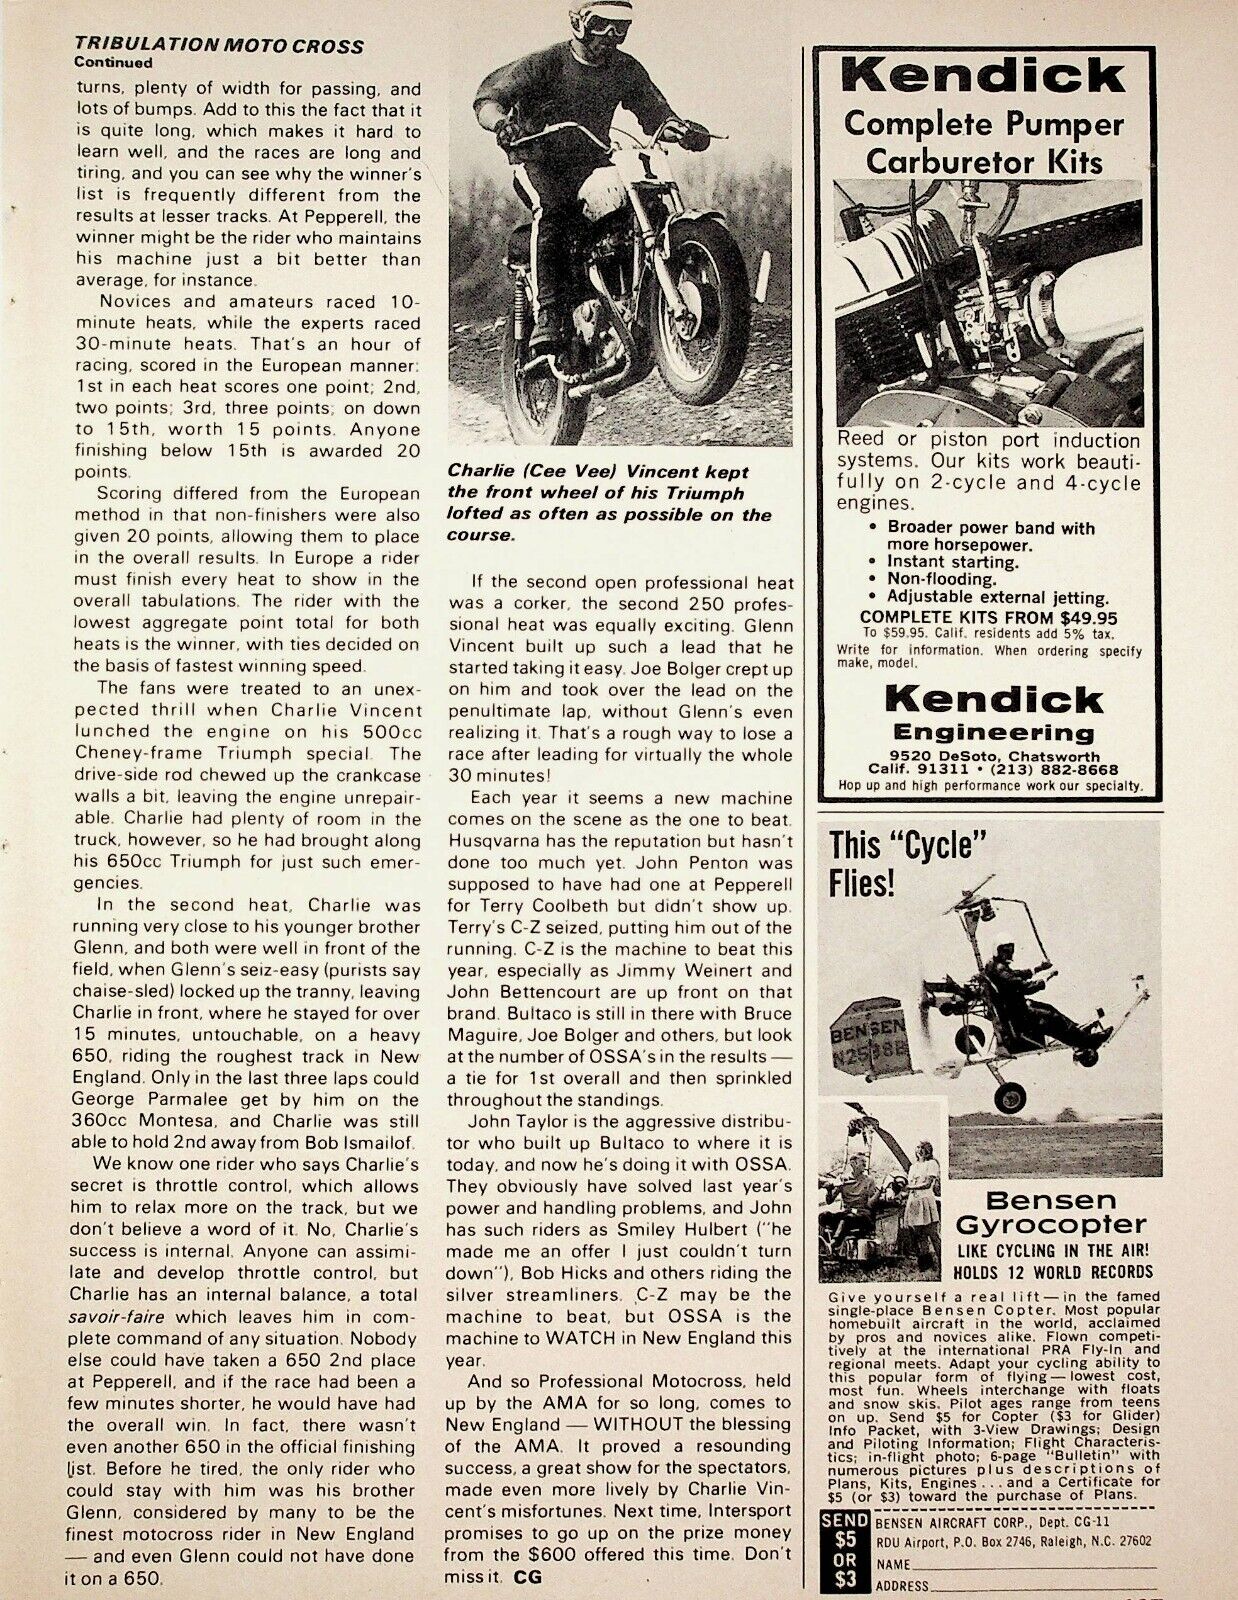 1971 Bensen Gyrocopter Flying Cycle Helicopter Aircraft - Vintage Motorcycle Ad